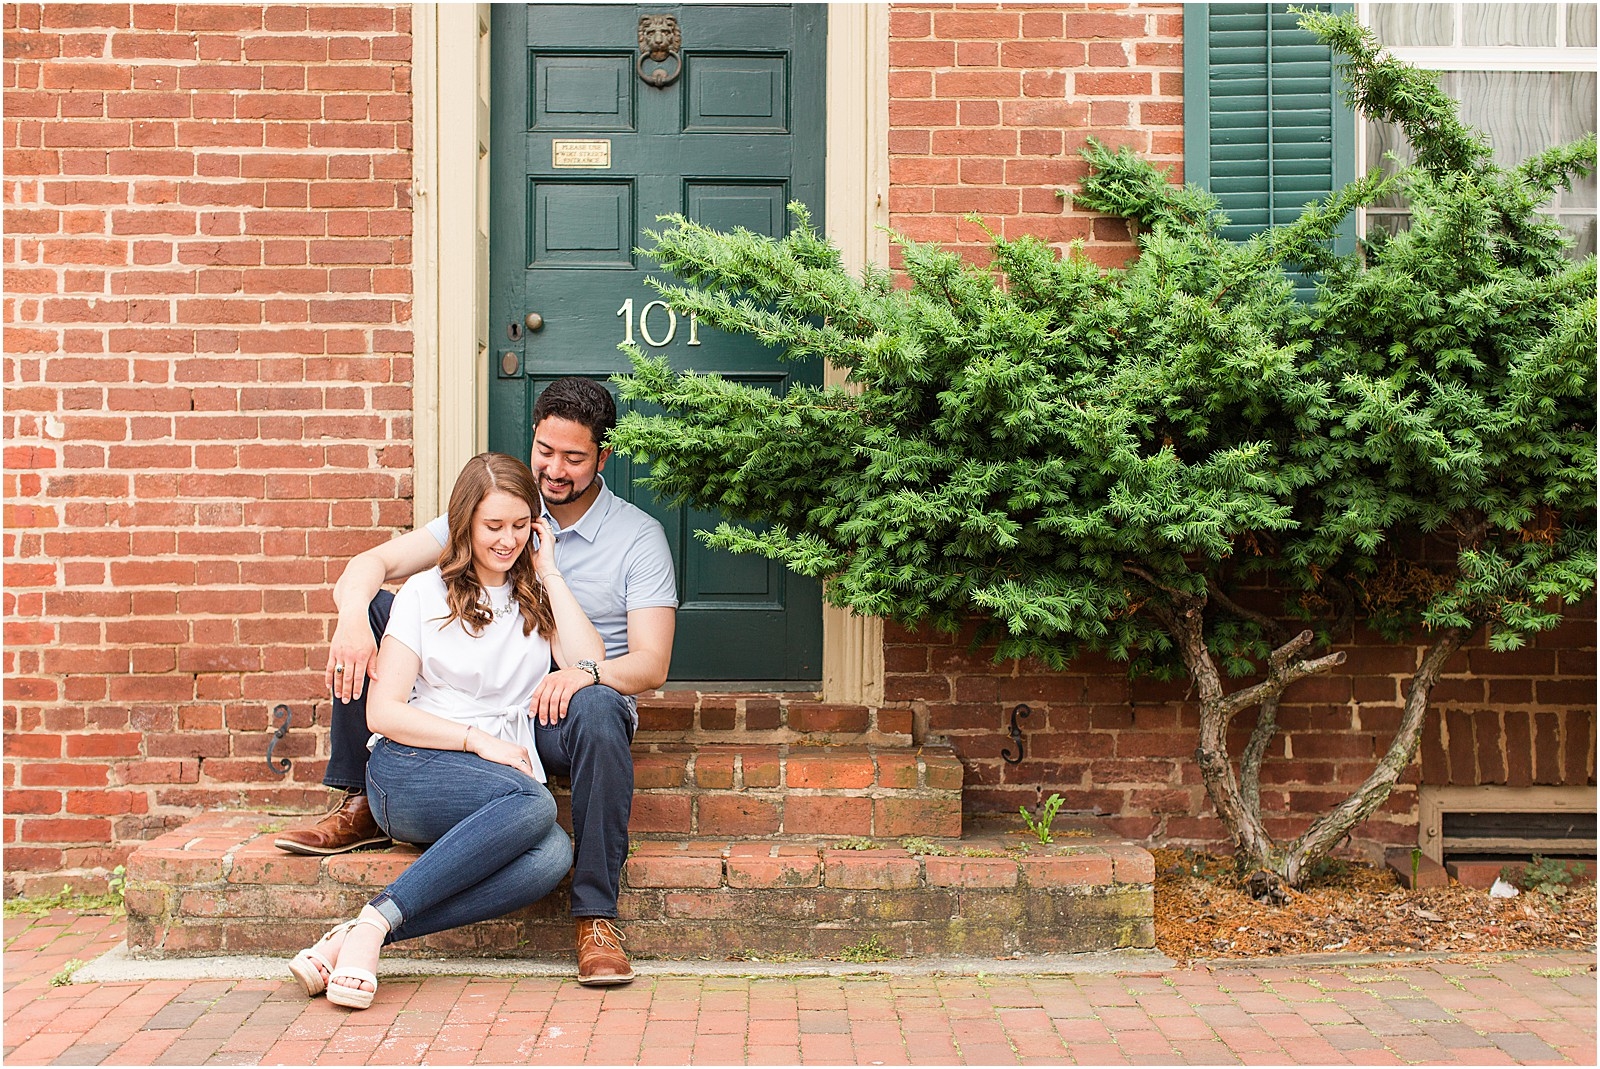 A Stone Tower Winery Leesburgh Engagement Session | Caitlin and Jason 030.jpg